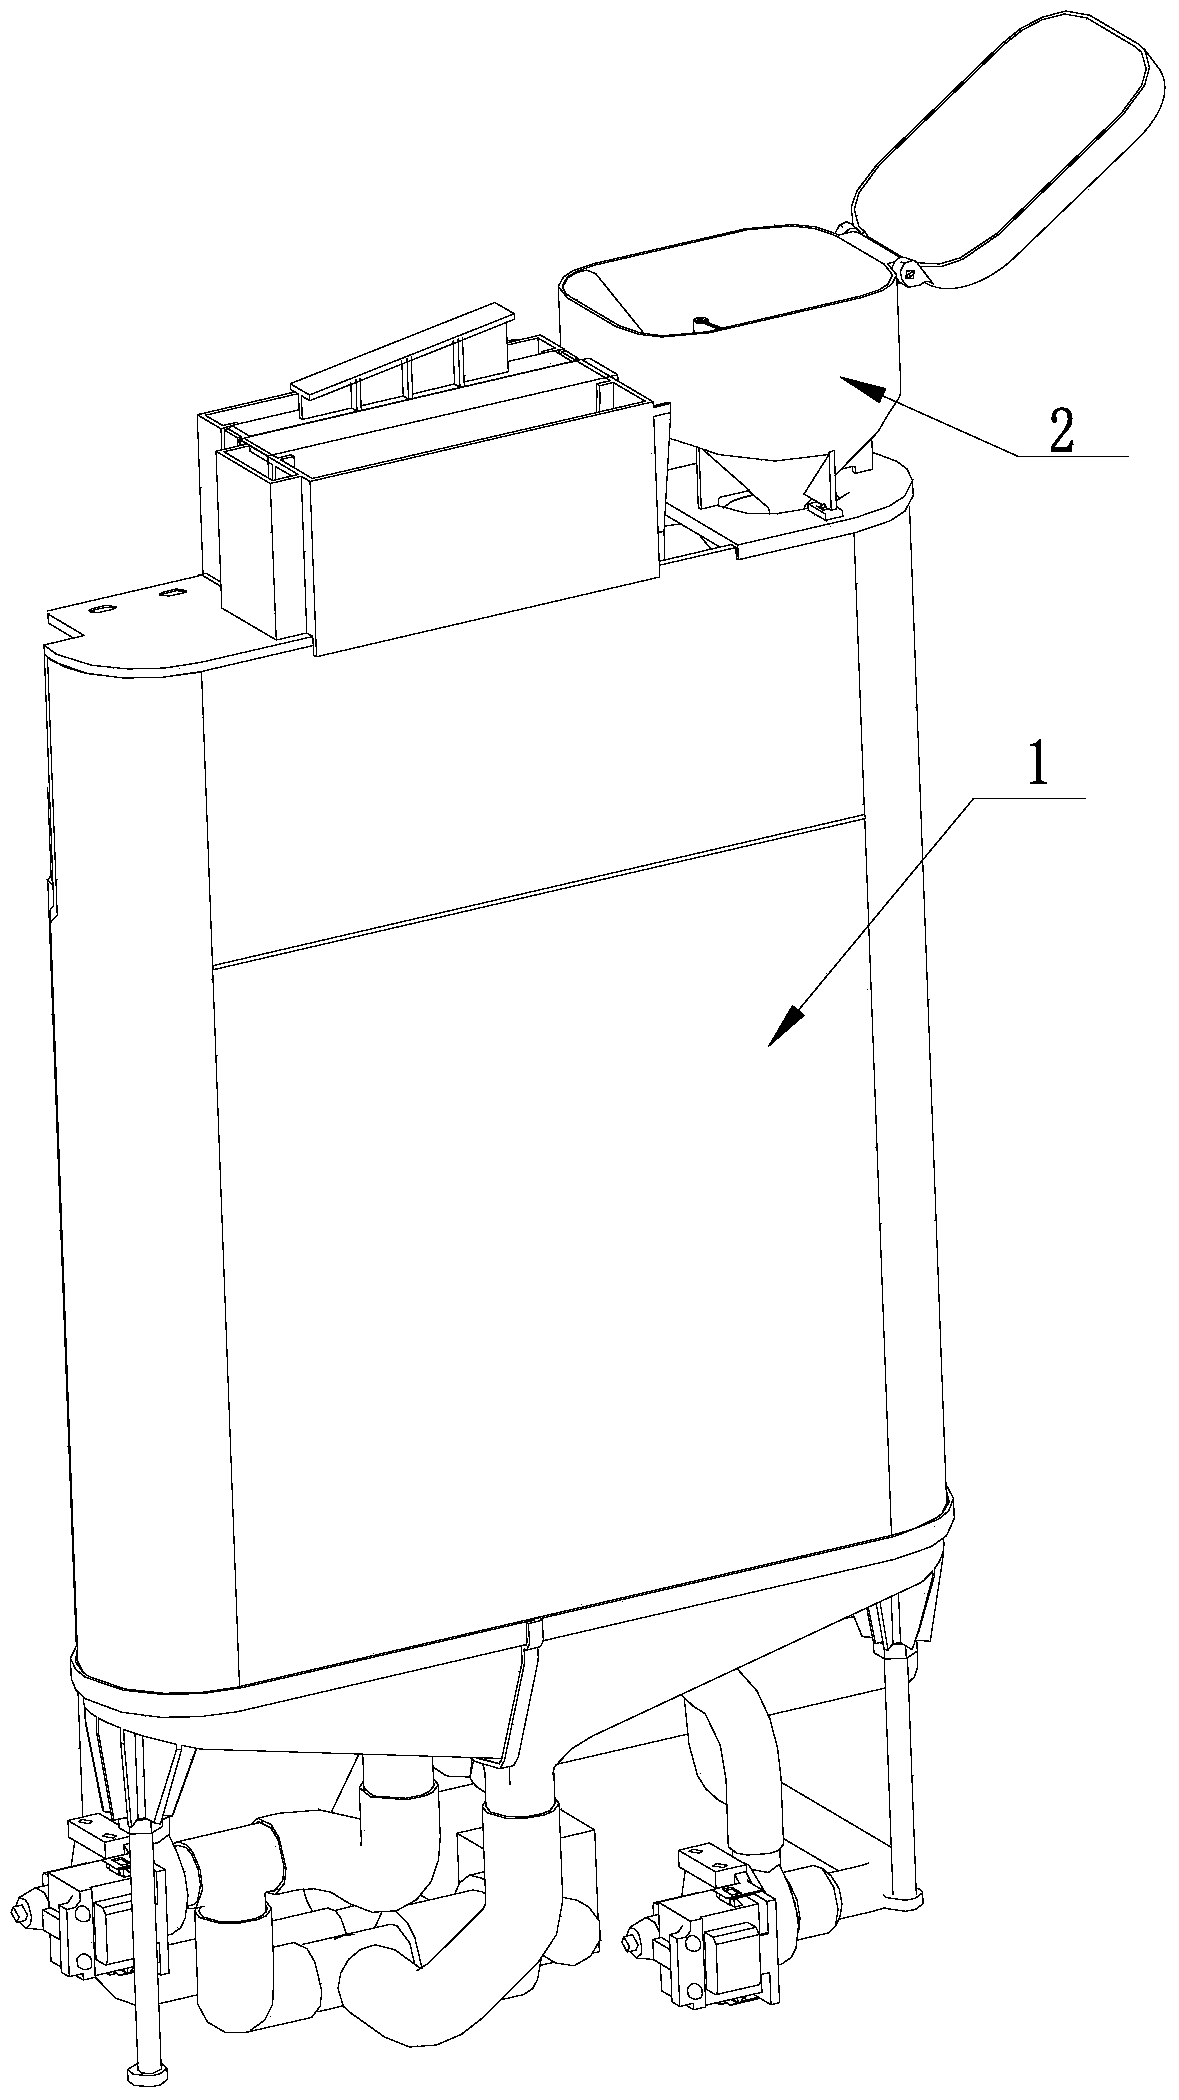 A fixing mechanism of a flocculant dispenser and a washing machine